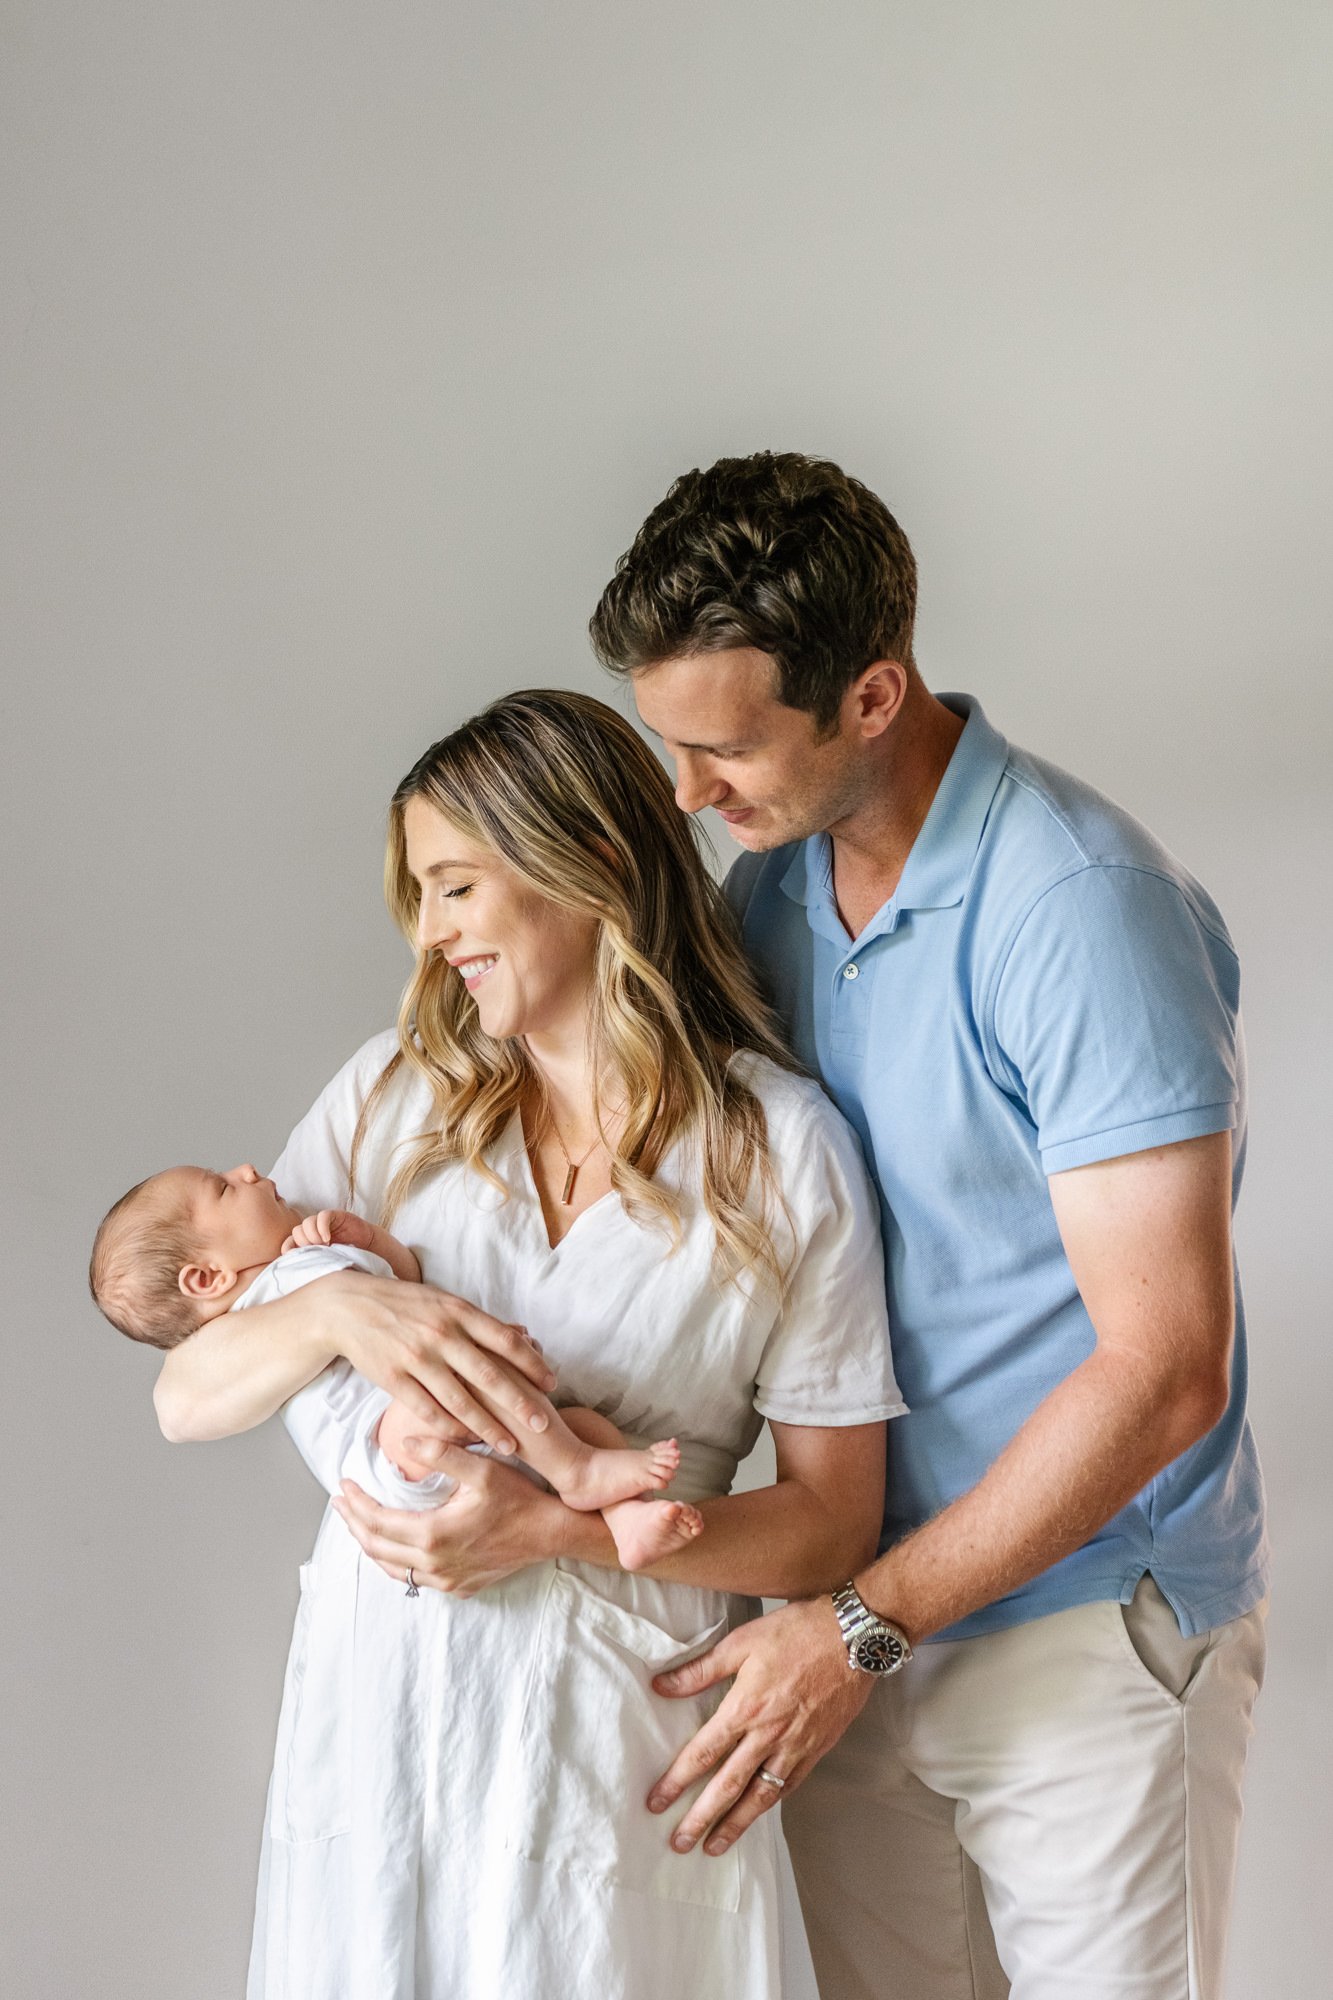  Dad holds mom from behind while both parents smile at their precious newborn baby boy during their in-home portrait session. #candidposeinspo #newbornphotography #shorthillsphotographer #familyphotographersinnewjersey #inhomeportraits #newbornposein